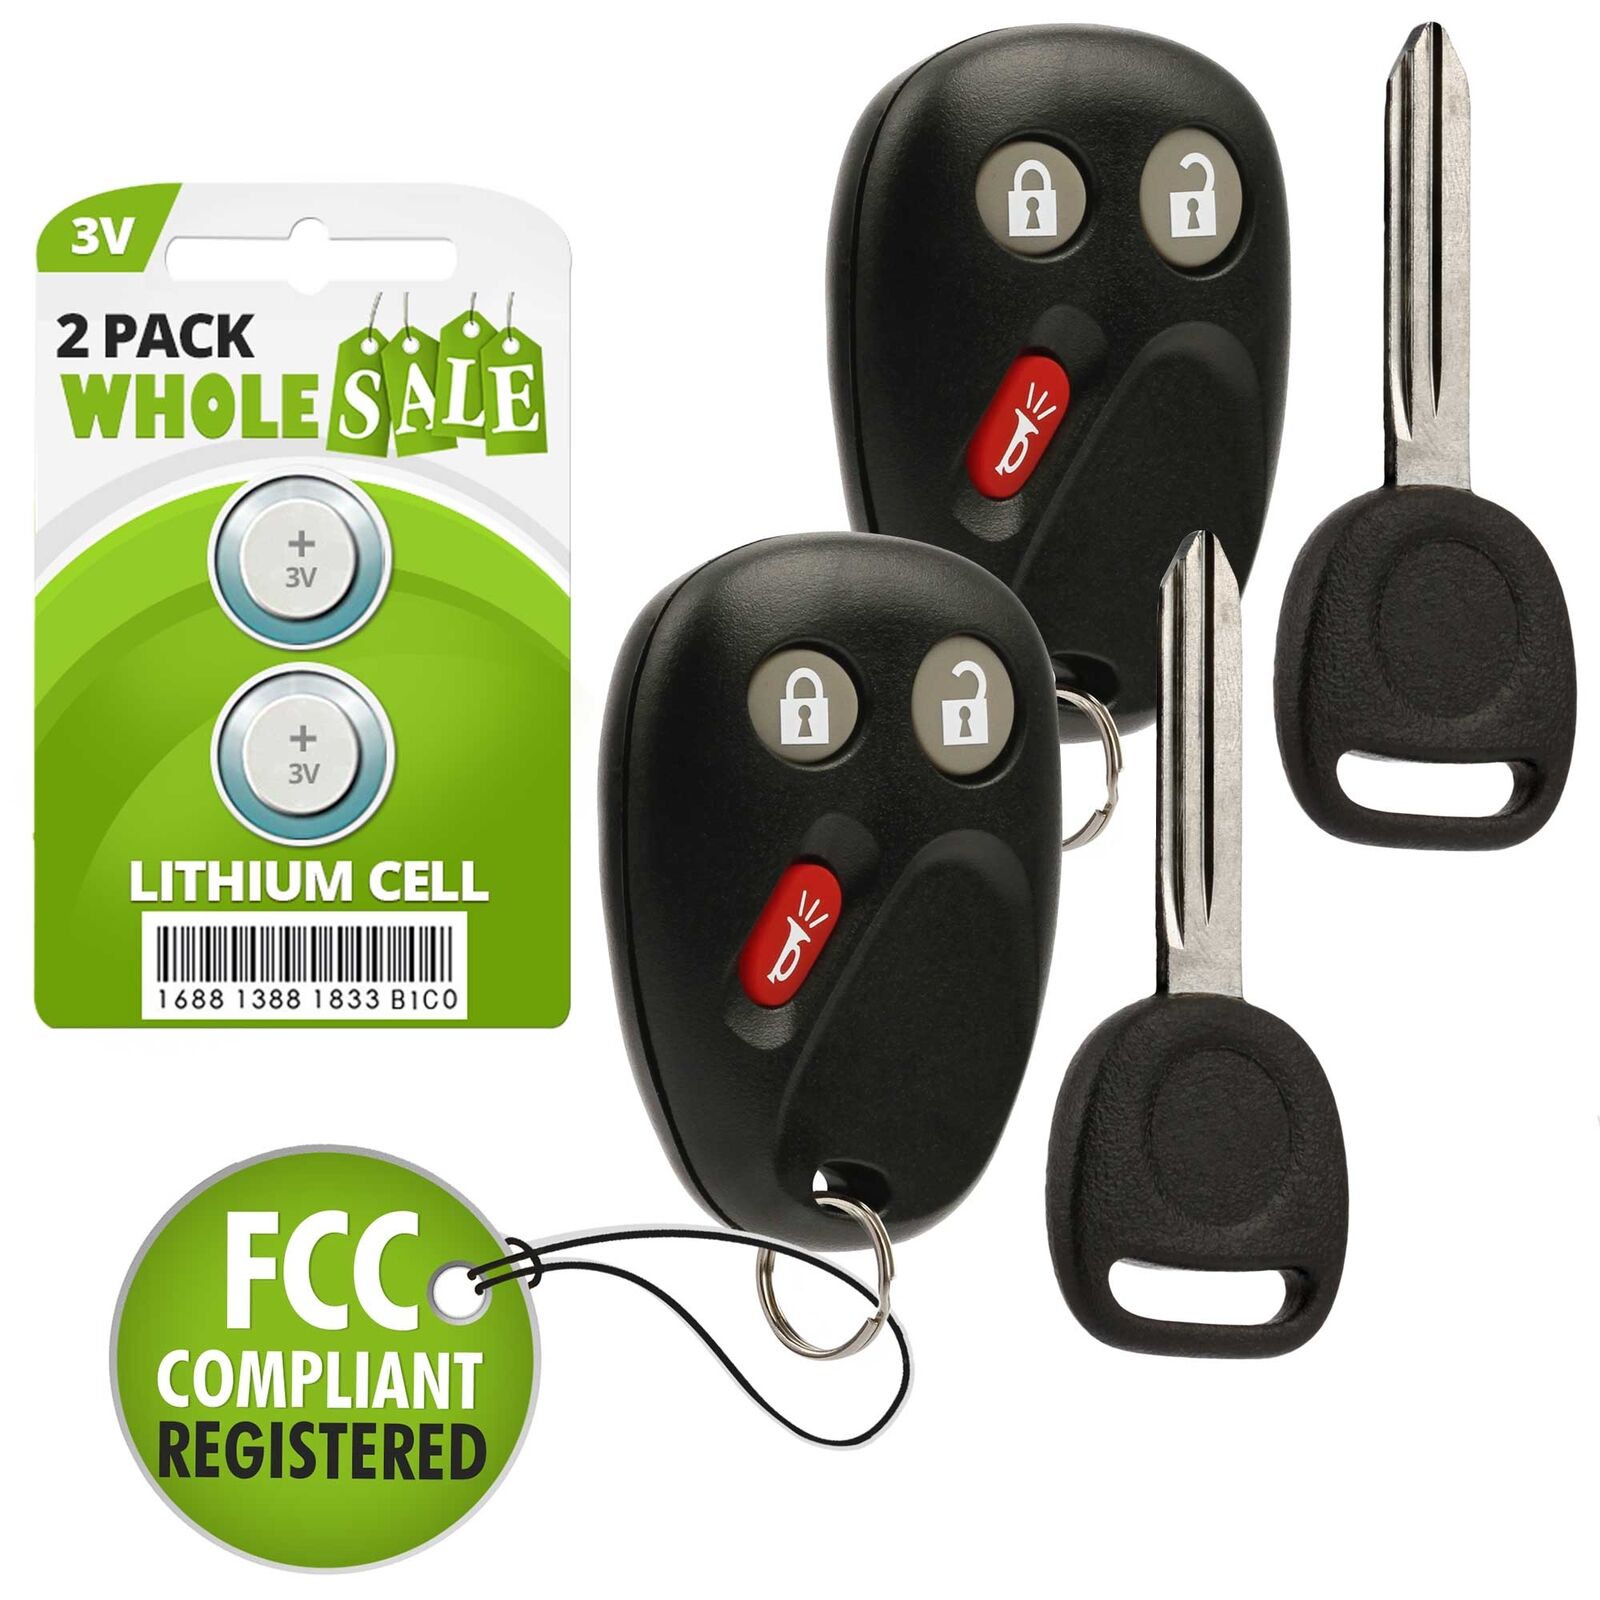 2 Replacement For 2003 2004 2005 2006 Hummer H2 Key Fob Remote